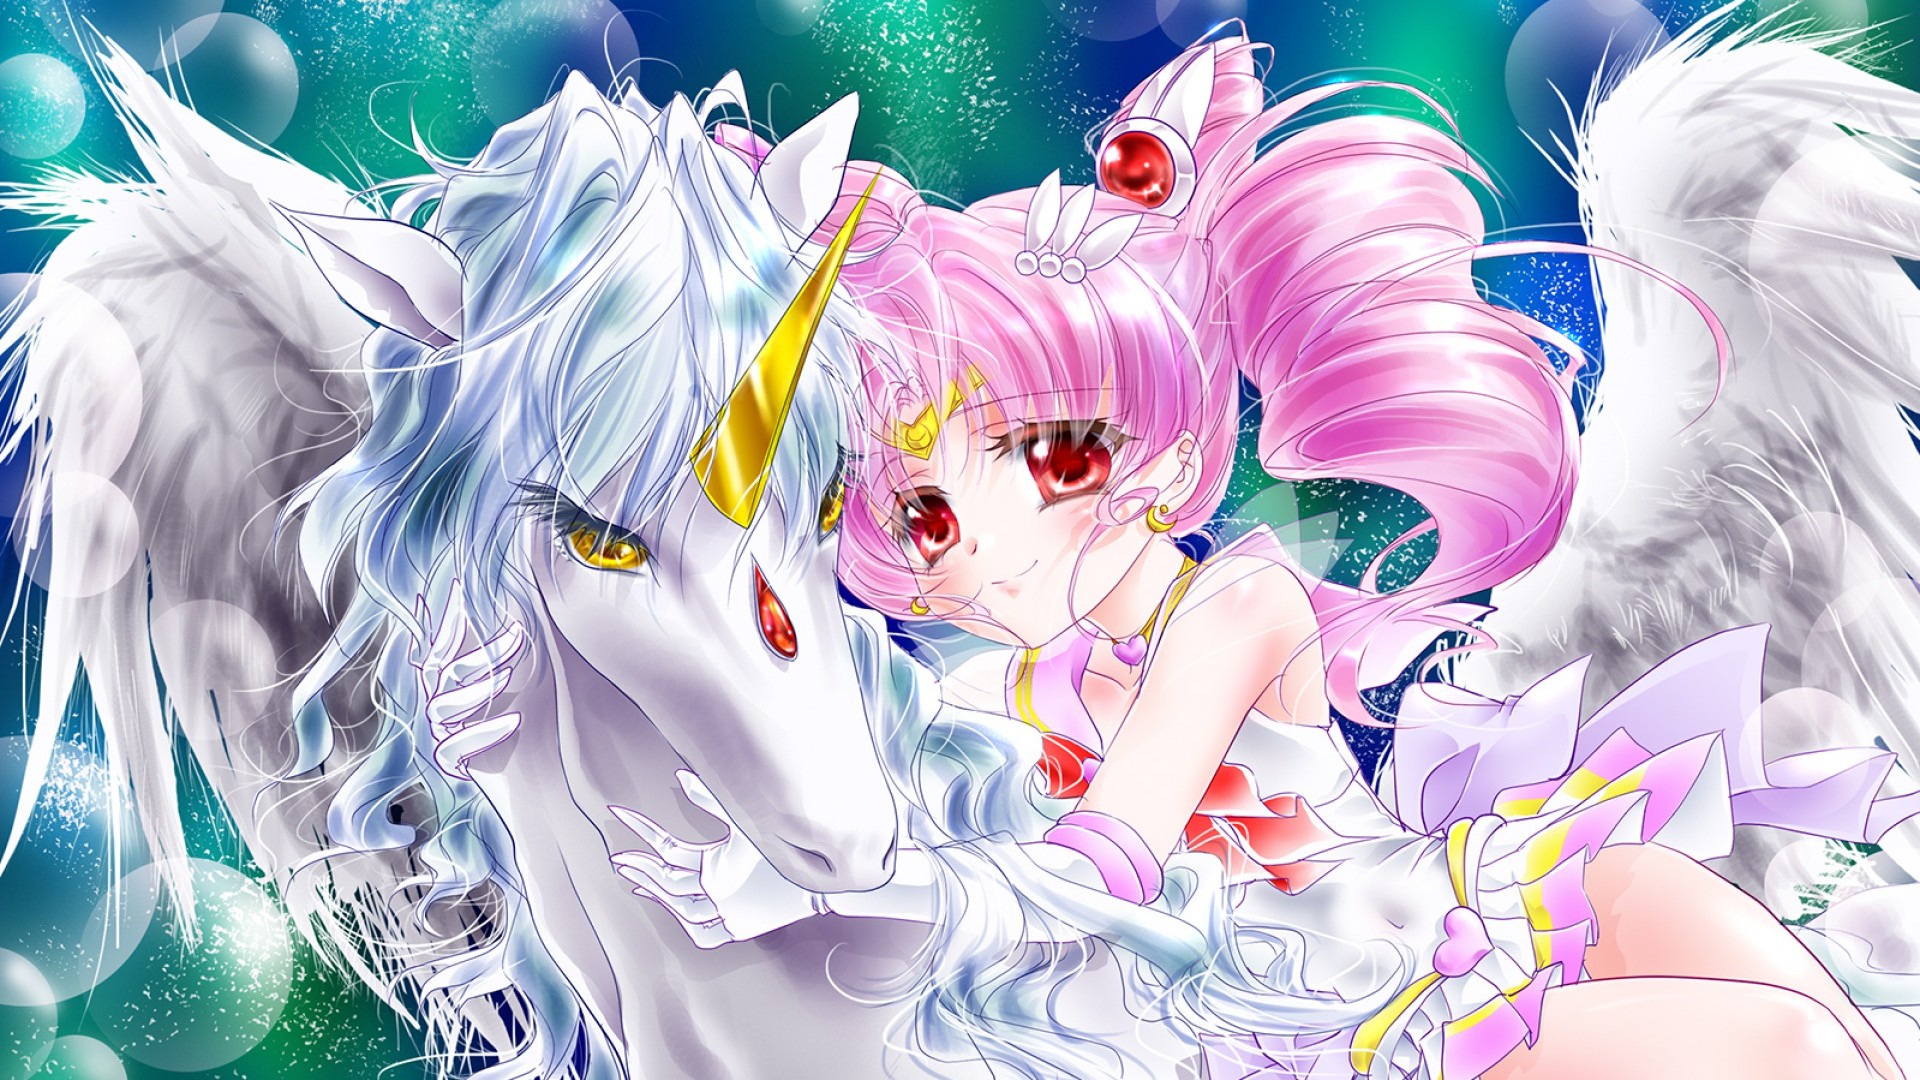 Cute Girly Unicorn Desktop Backgrounds With high-resolution 1920X1080 pixel. You can use this wallpaper for your Desktop Computer Backgrounds, Mac Wallpapers, Android Lock screen or iPhone Screensavers and another smartphone device